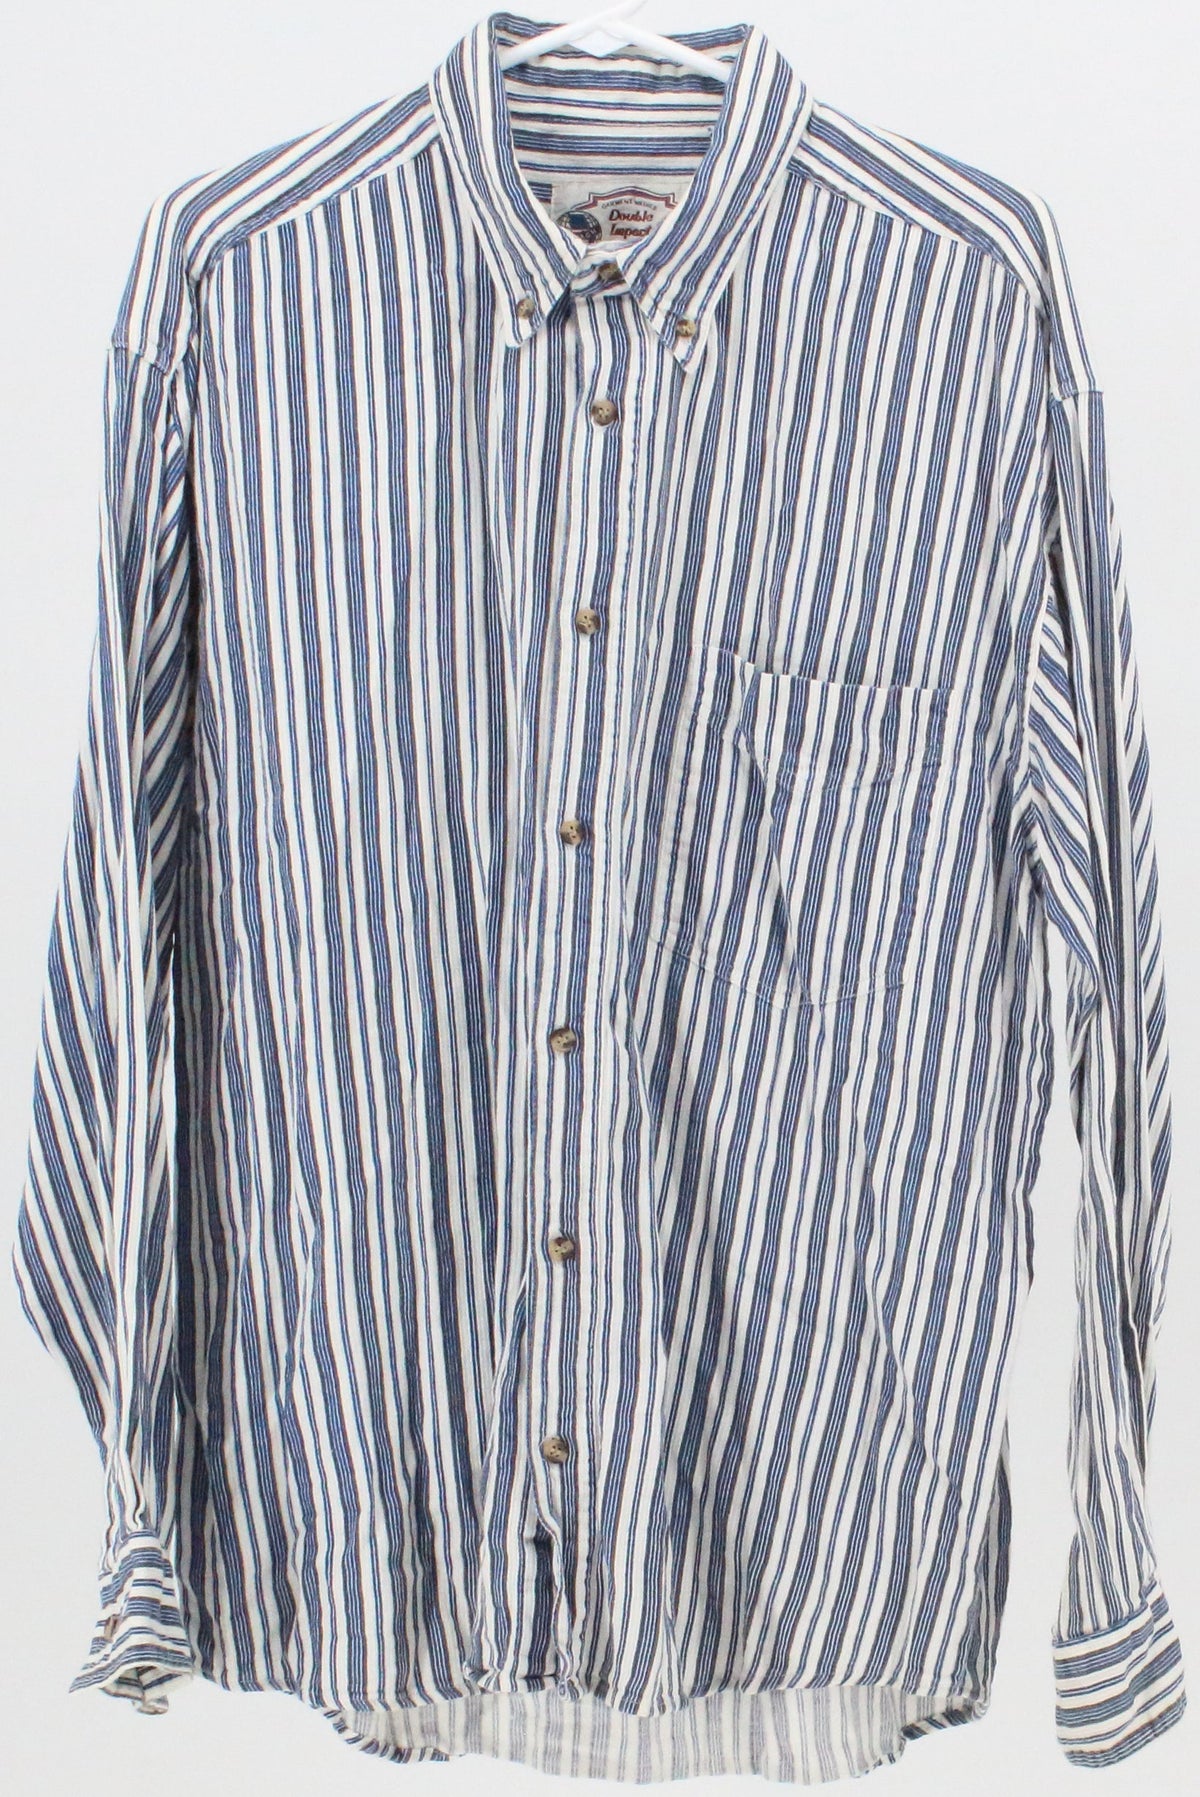 Double Impact Blue and White Striped Shirt